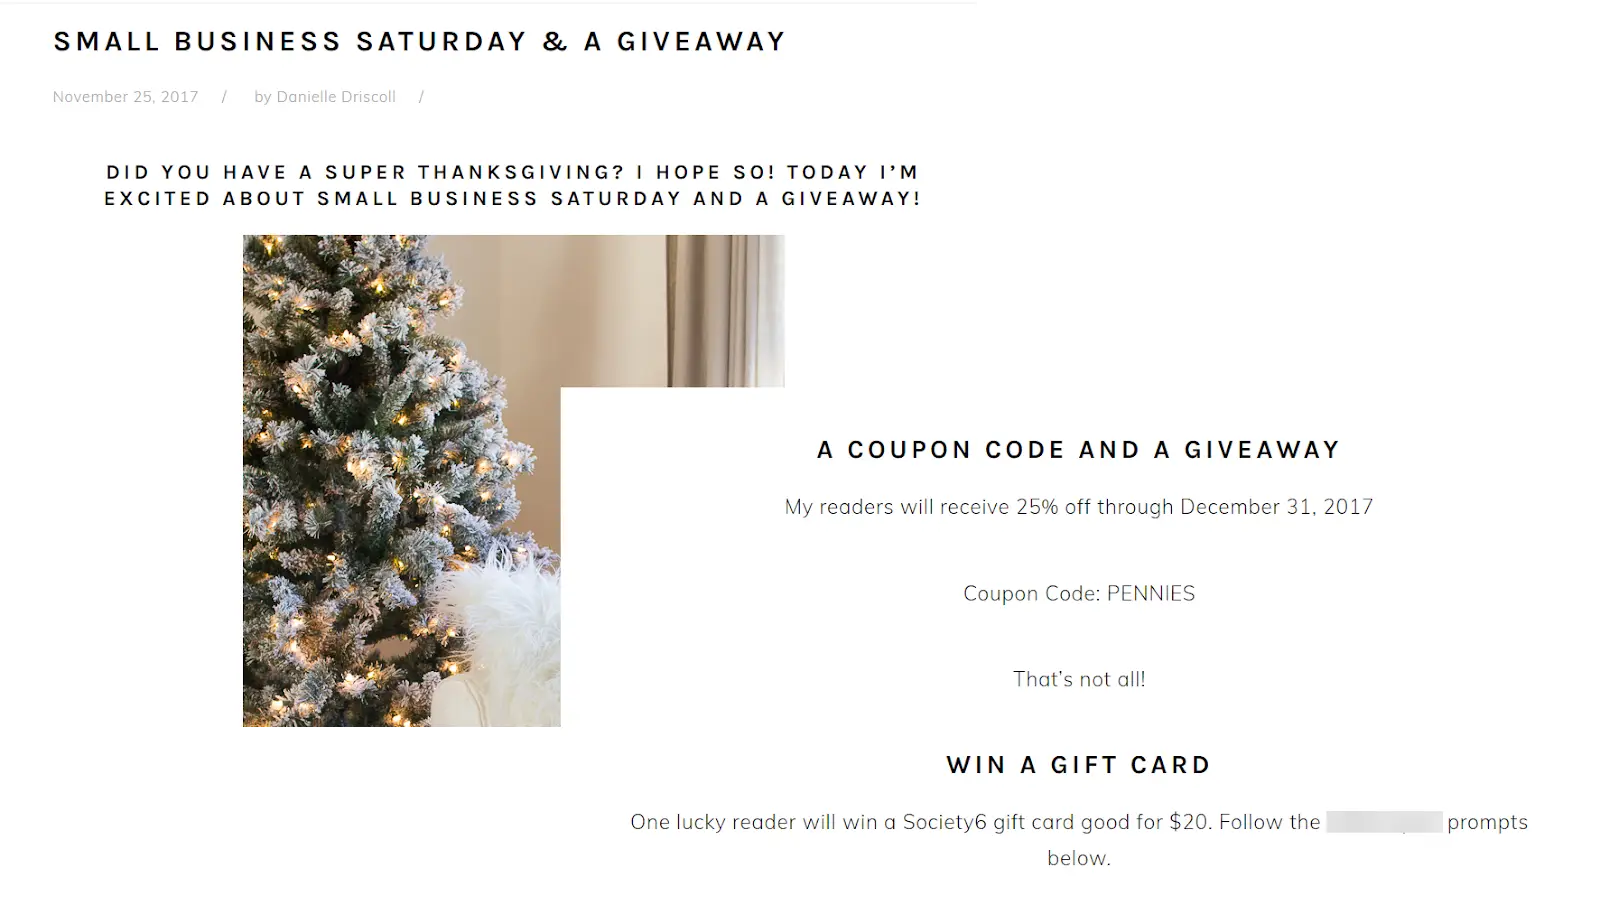 2 screenshots from an online lifestyle blog. The first reads "Small Business Saturday and a giveaway", above a photo of a decorated Christmas tree. The second screenshot offers readers a 25% off coupon code and the chance to win a gift card by signing up.